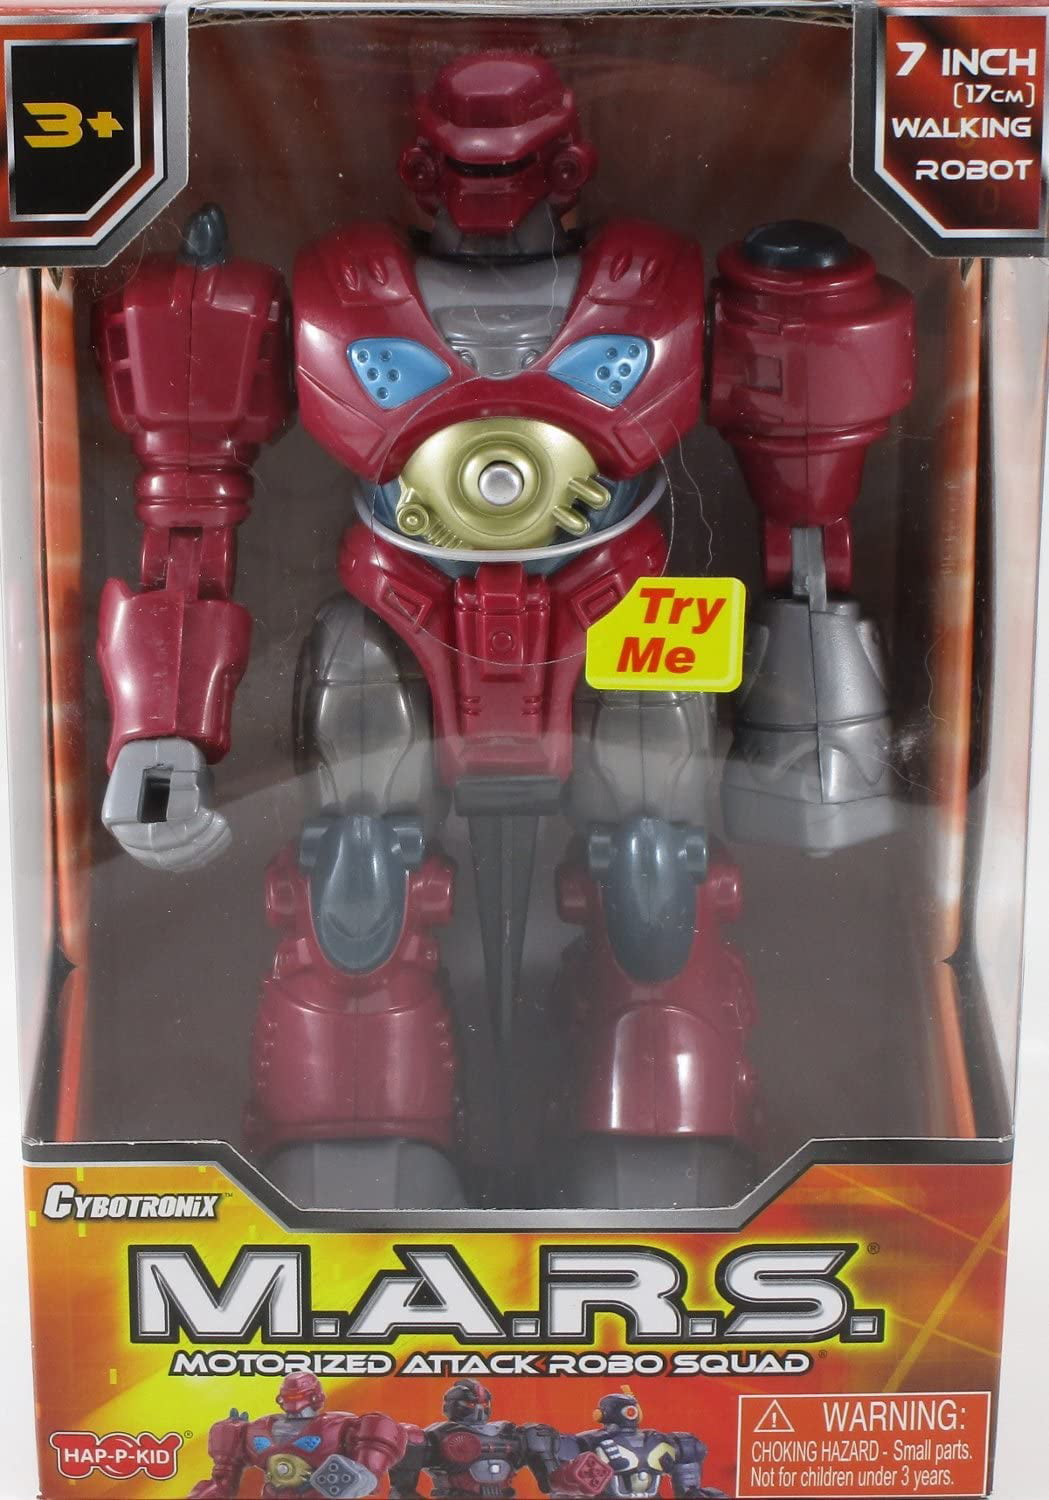 Details about   M.A.R.S Red Revo Robot Hap-p-kid 7” Walking Robot Motorized Attack Robo Squad 